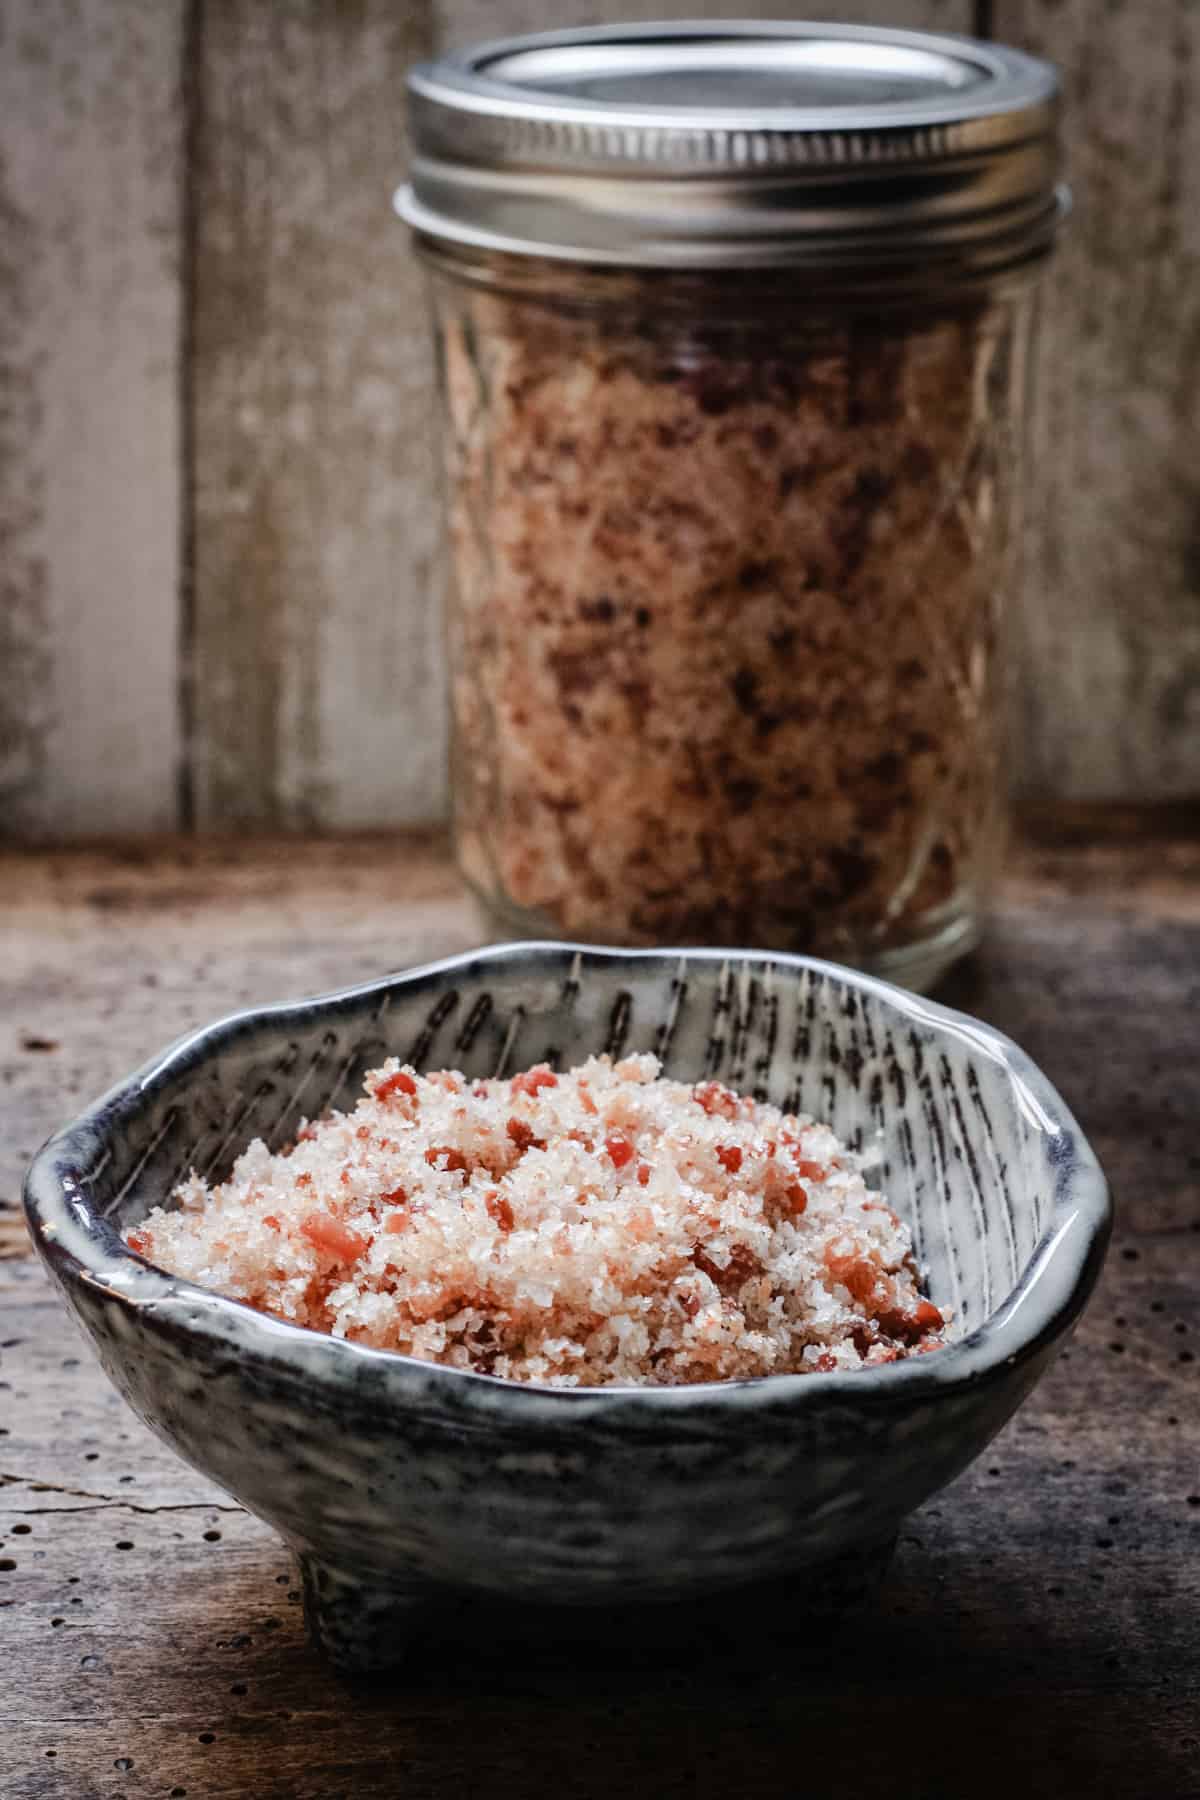 Bacon Salt is the ultimate condiment which can be sprinkled on anything and everything